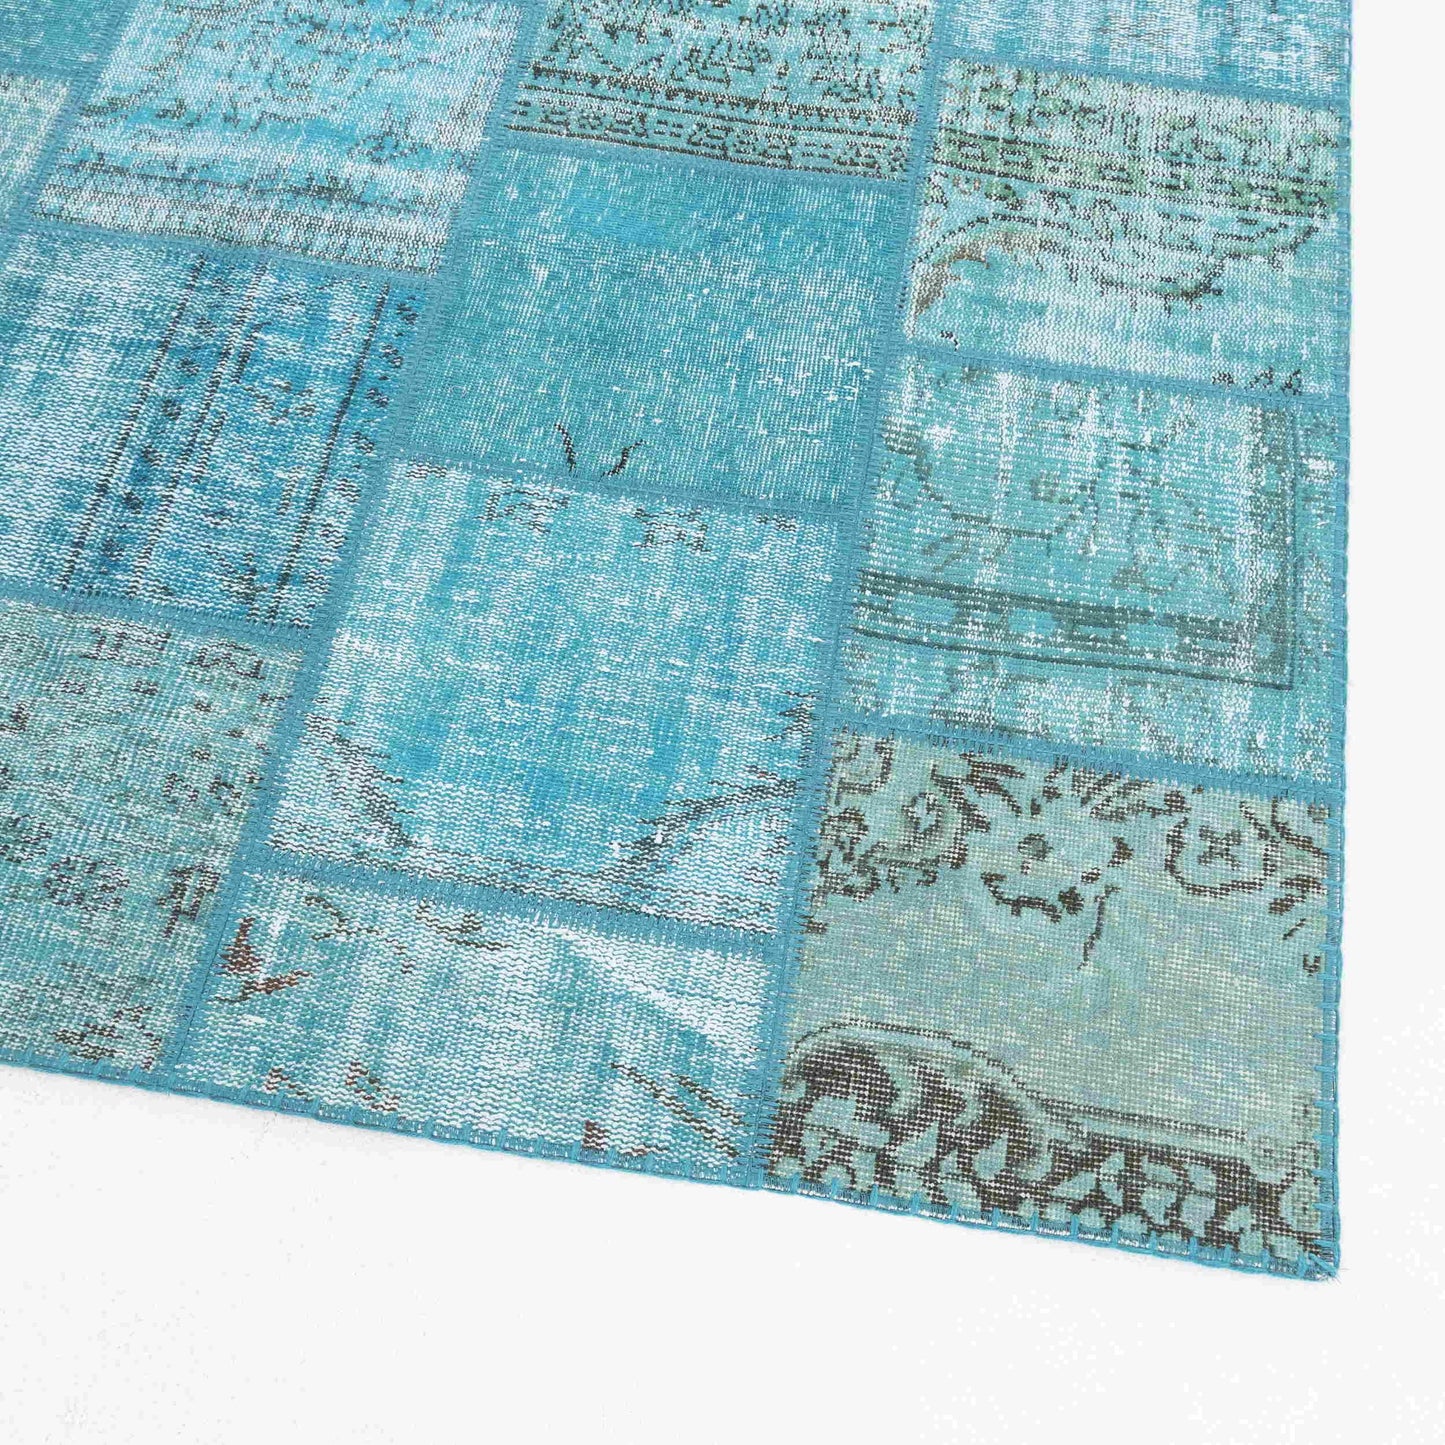 Oriental Rug Patchwork Hand Knotted Wool On Cotton 200 x 300 Cm - 6' 7'' x 9' 11'' ER23